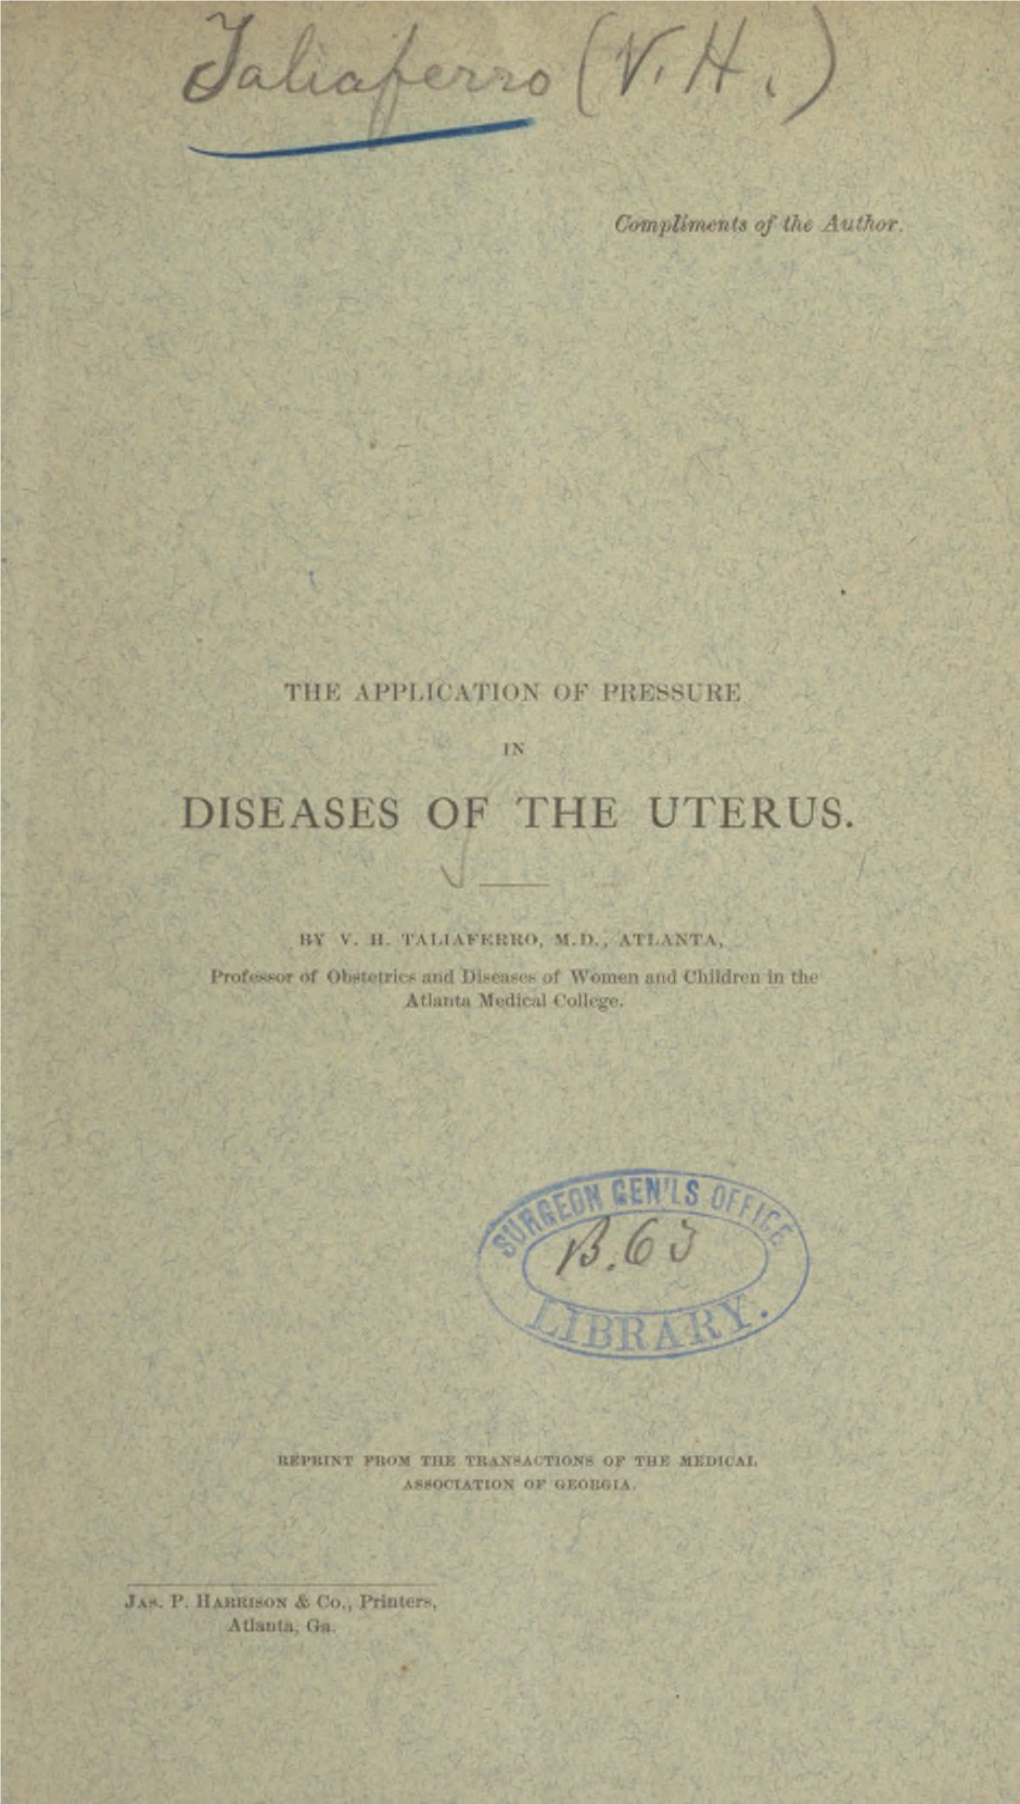 The Application of Pressure in Diseases of the Uterus